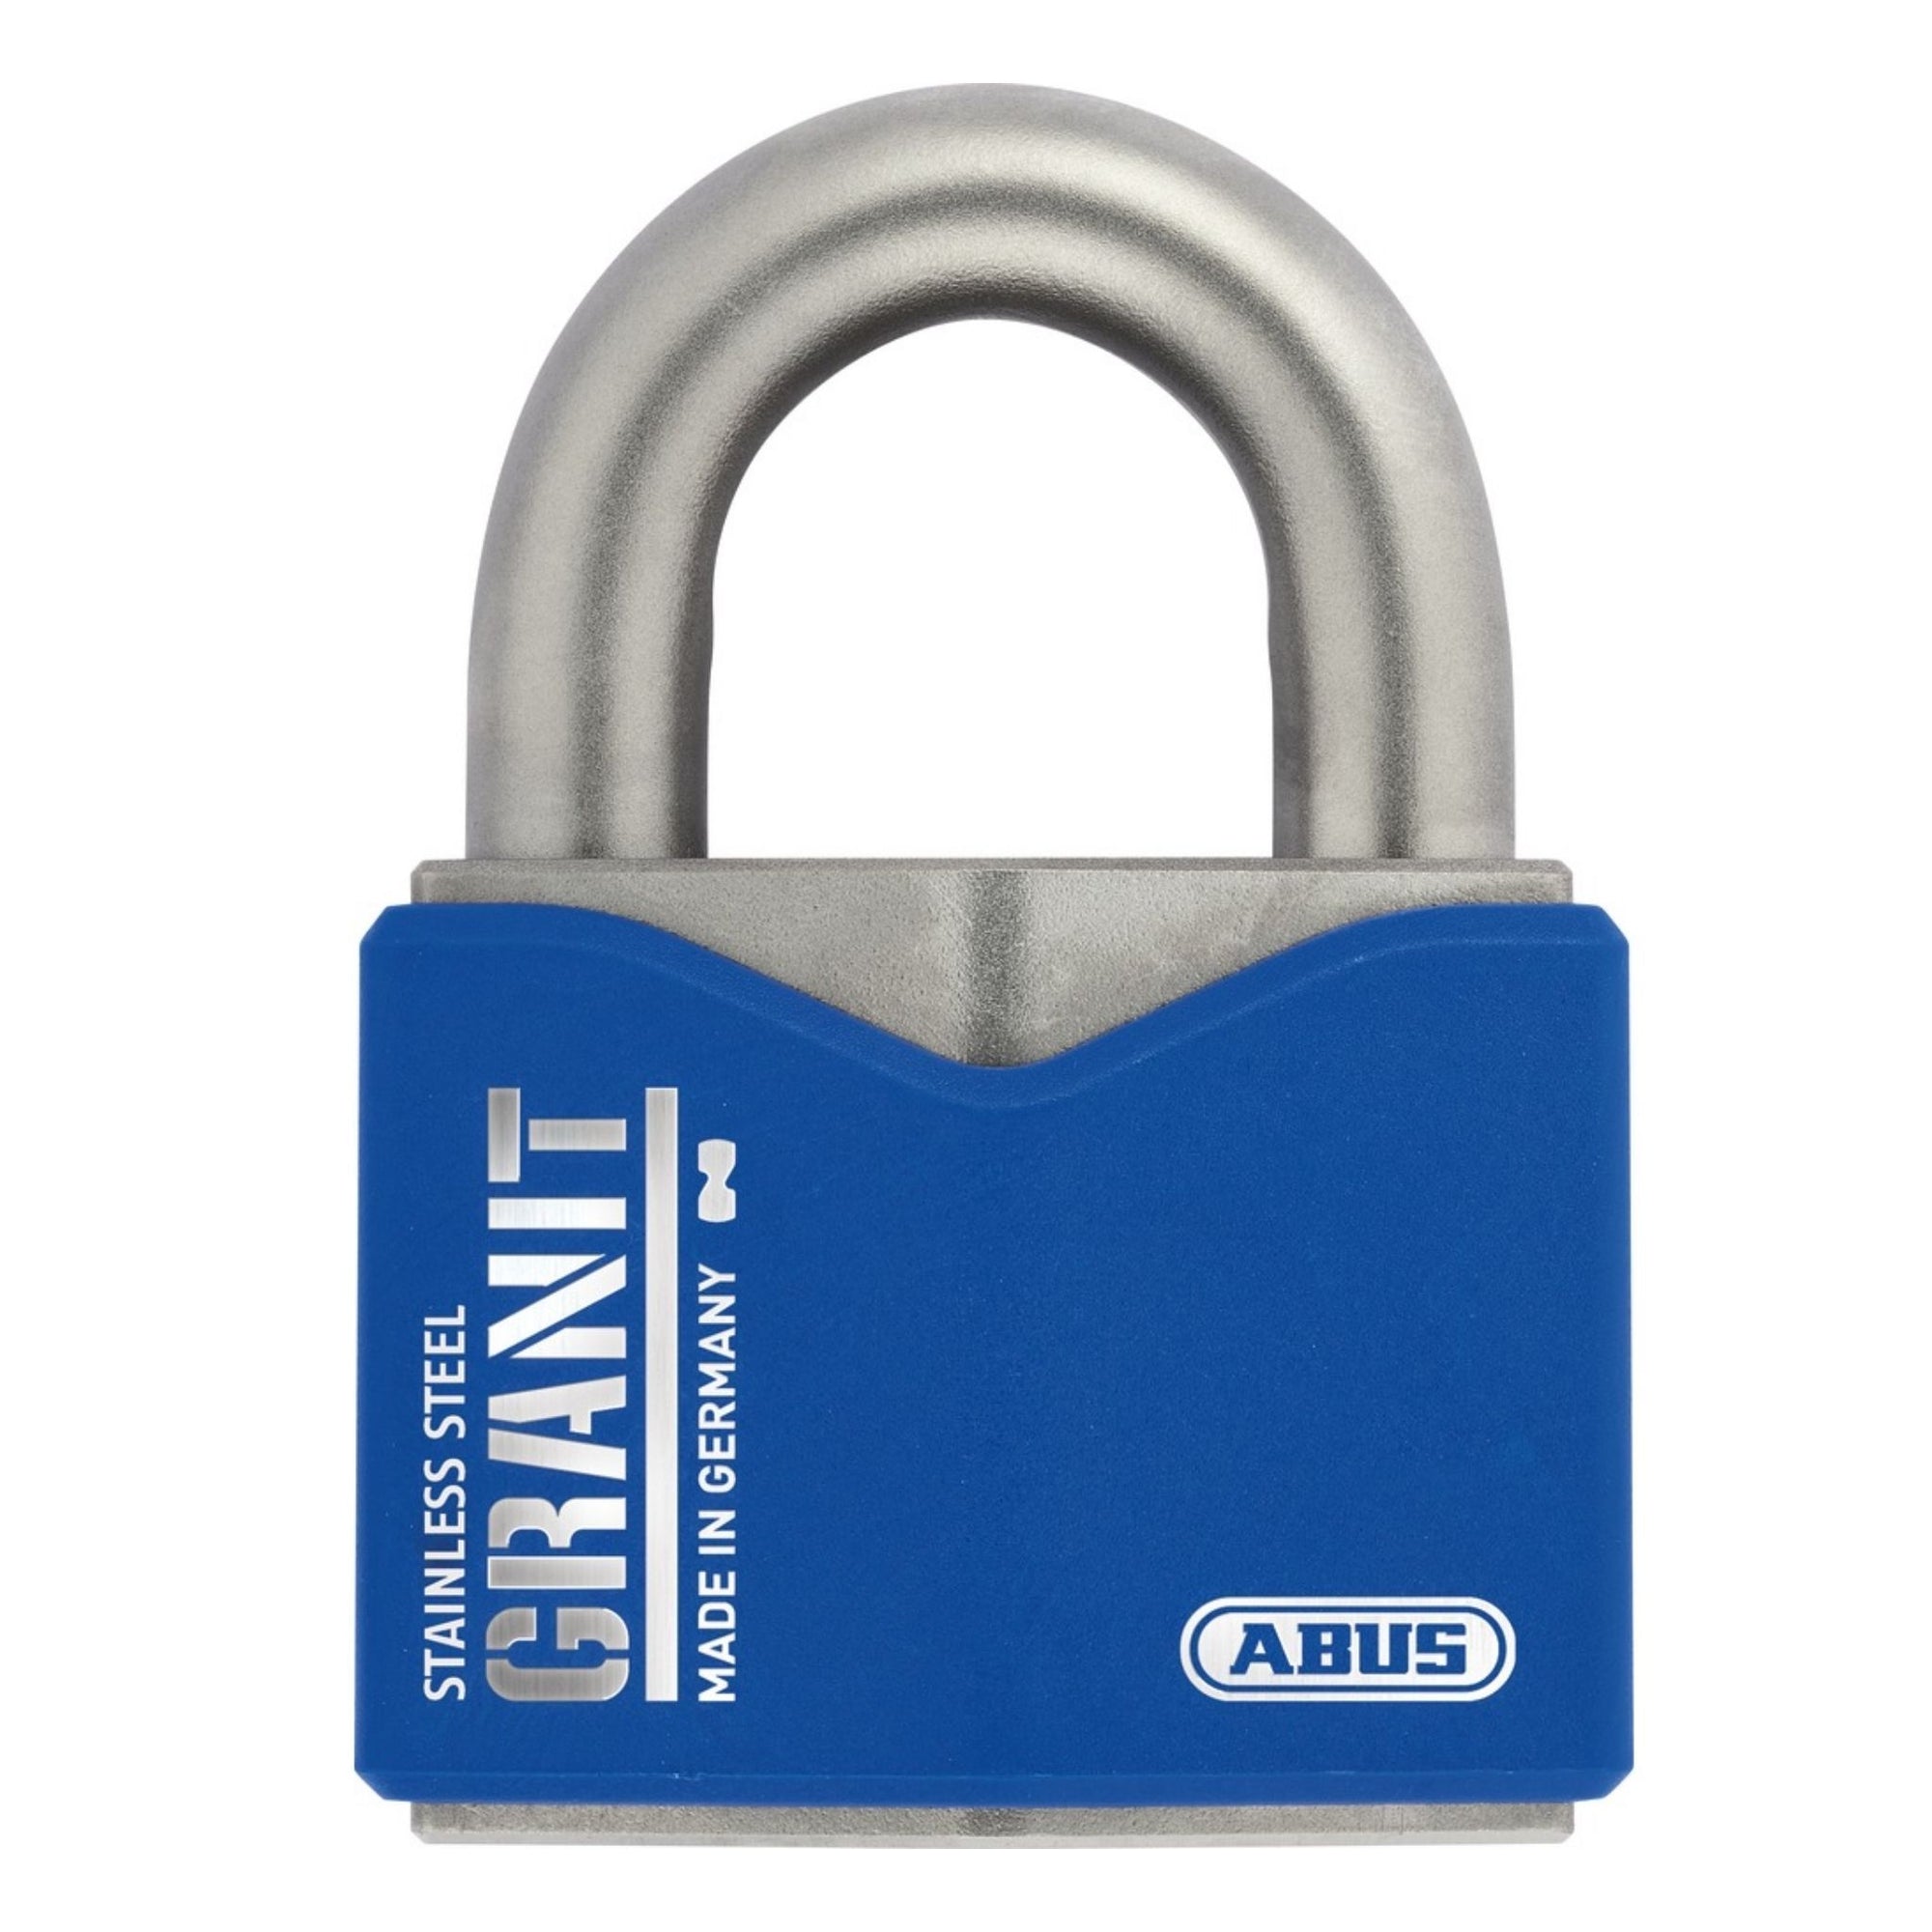 Abus 37ST/55 KD Granit Stainless Steel Lock - The Lock Source